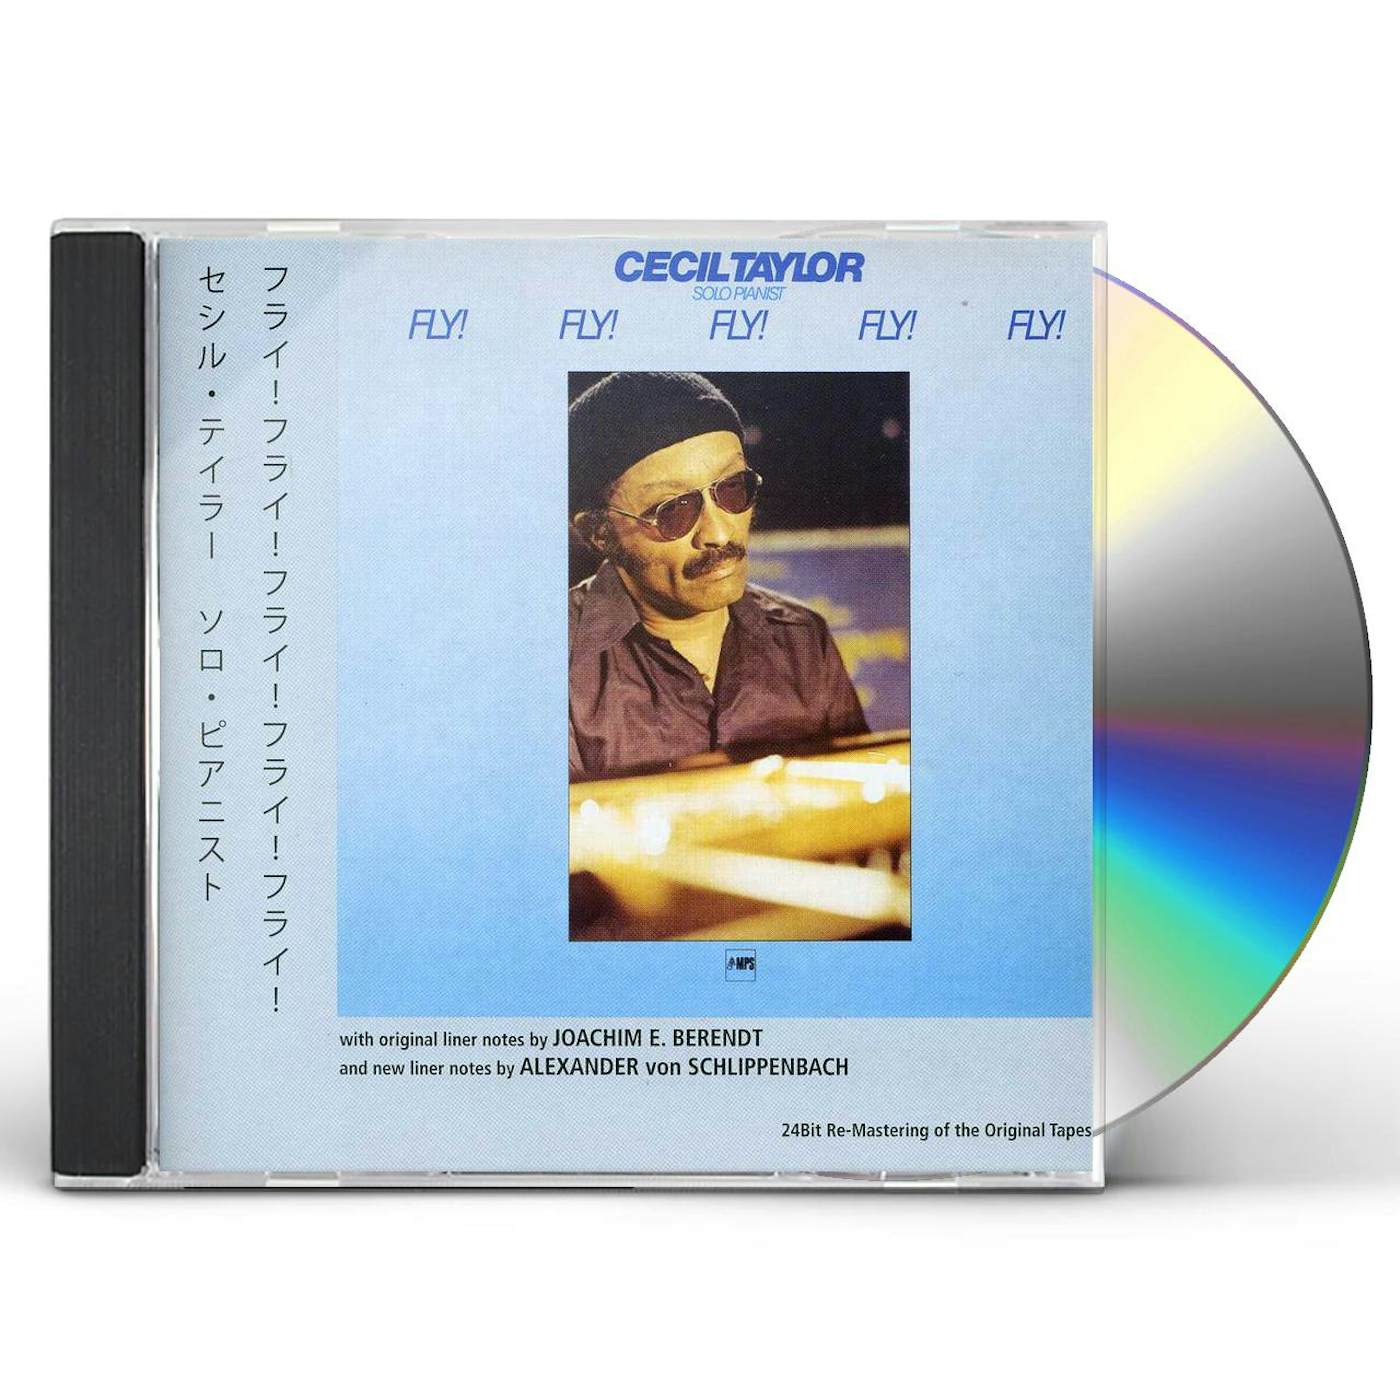 Cecil Taylor FLY FLY FLY FLY FLY CD